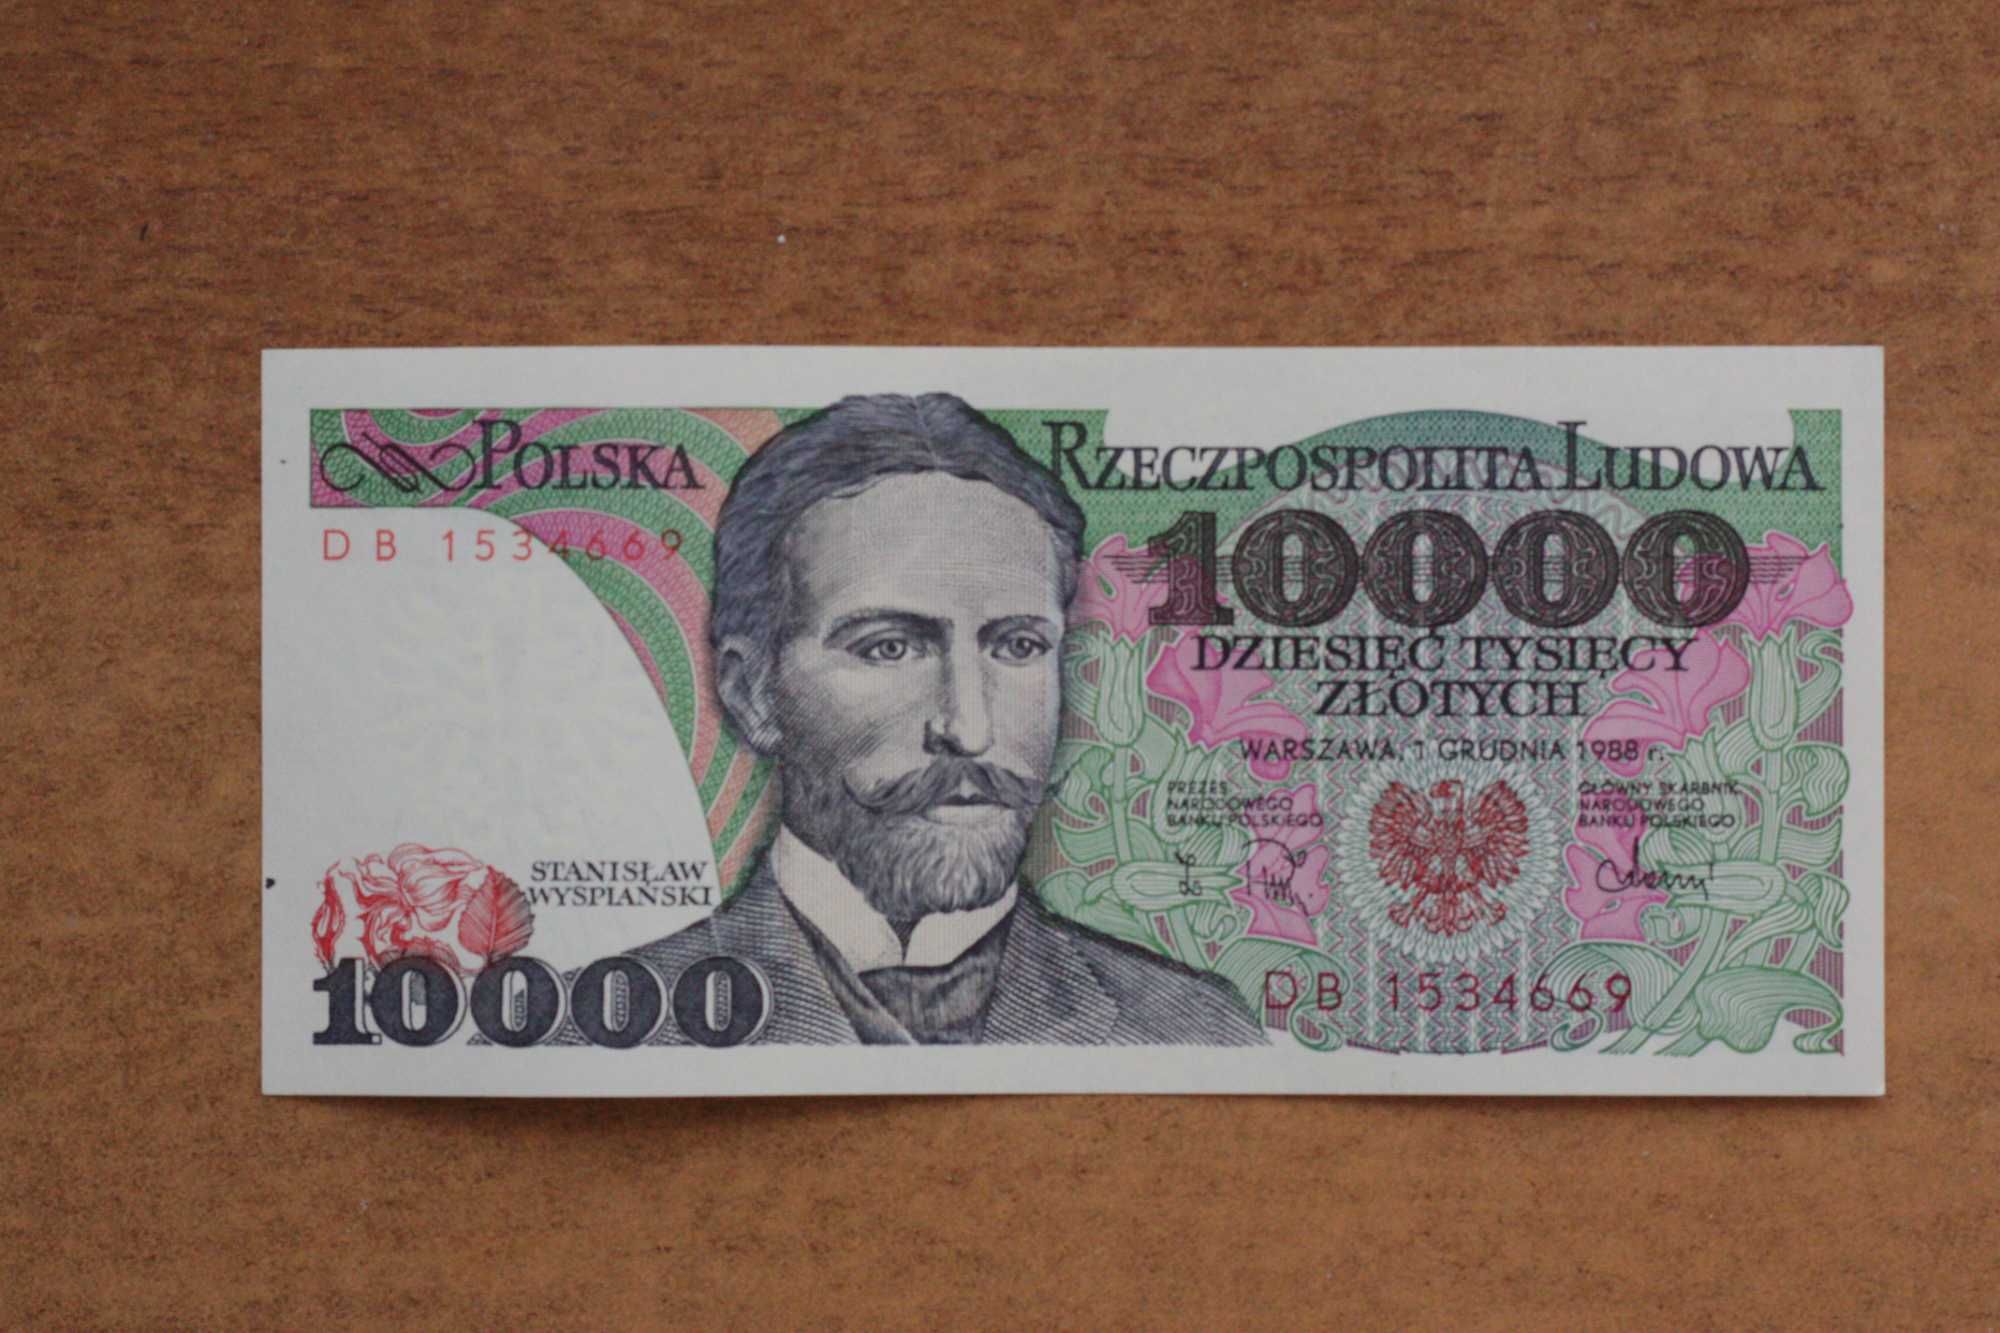 Banknoty 10000 stan bankowy